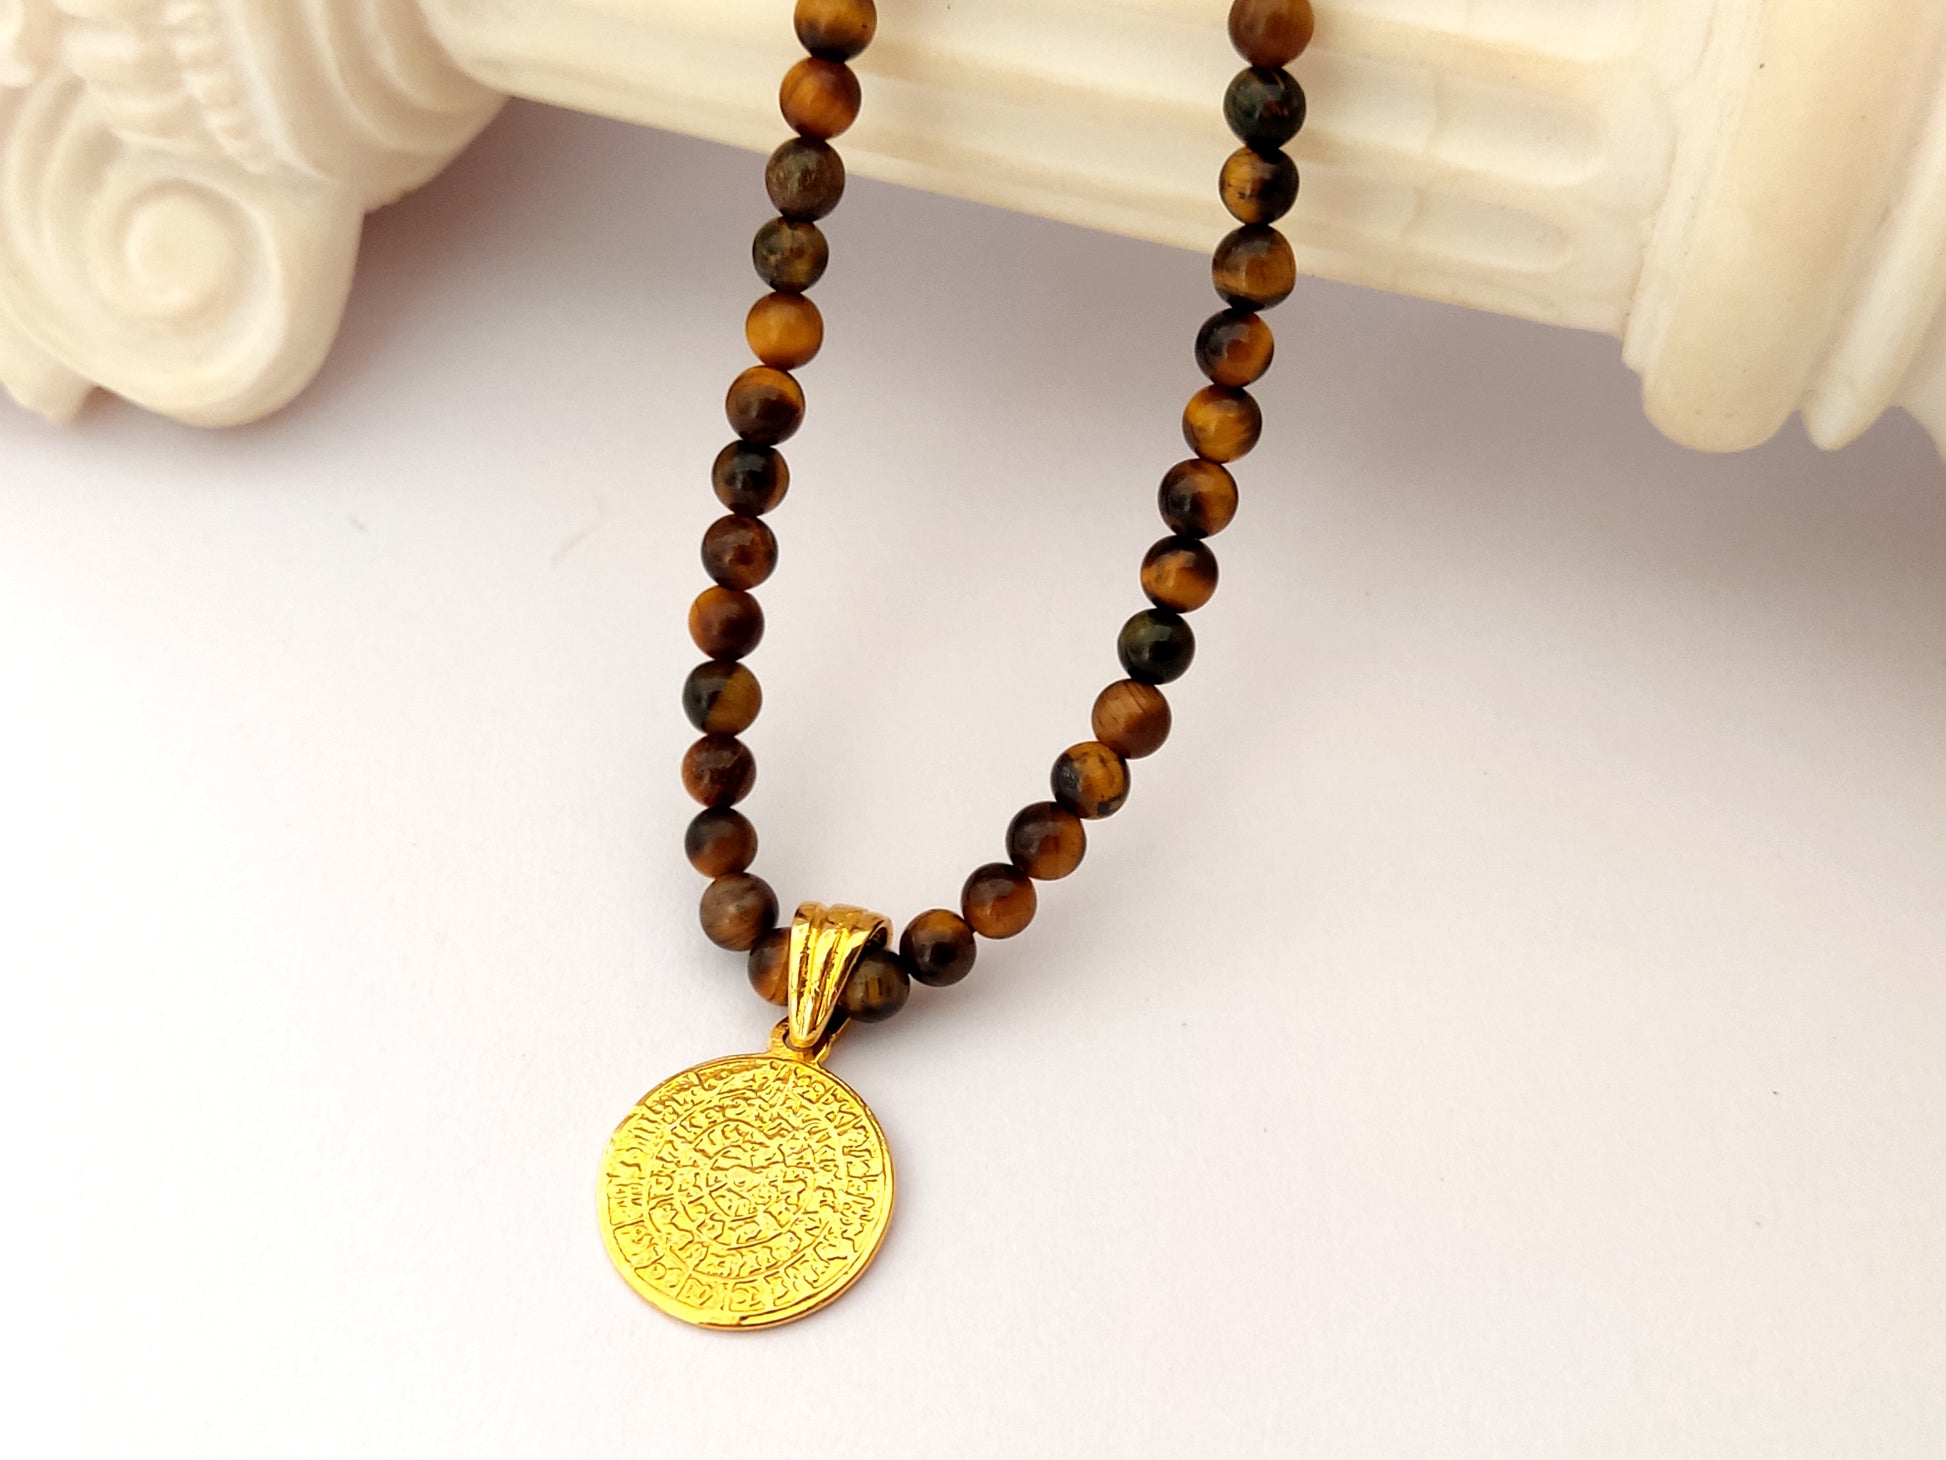 Phaistos Disc necklace with tiger's eye stones and gold plated silver greek pendant.